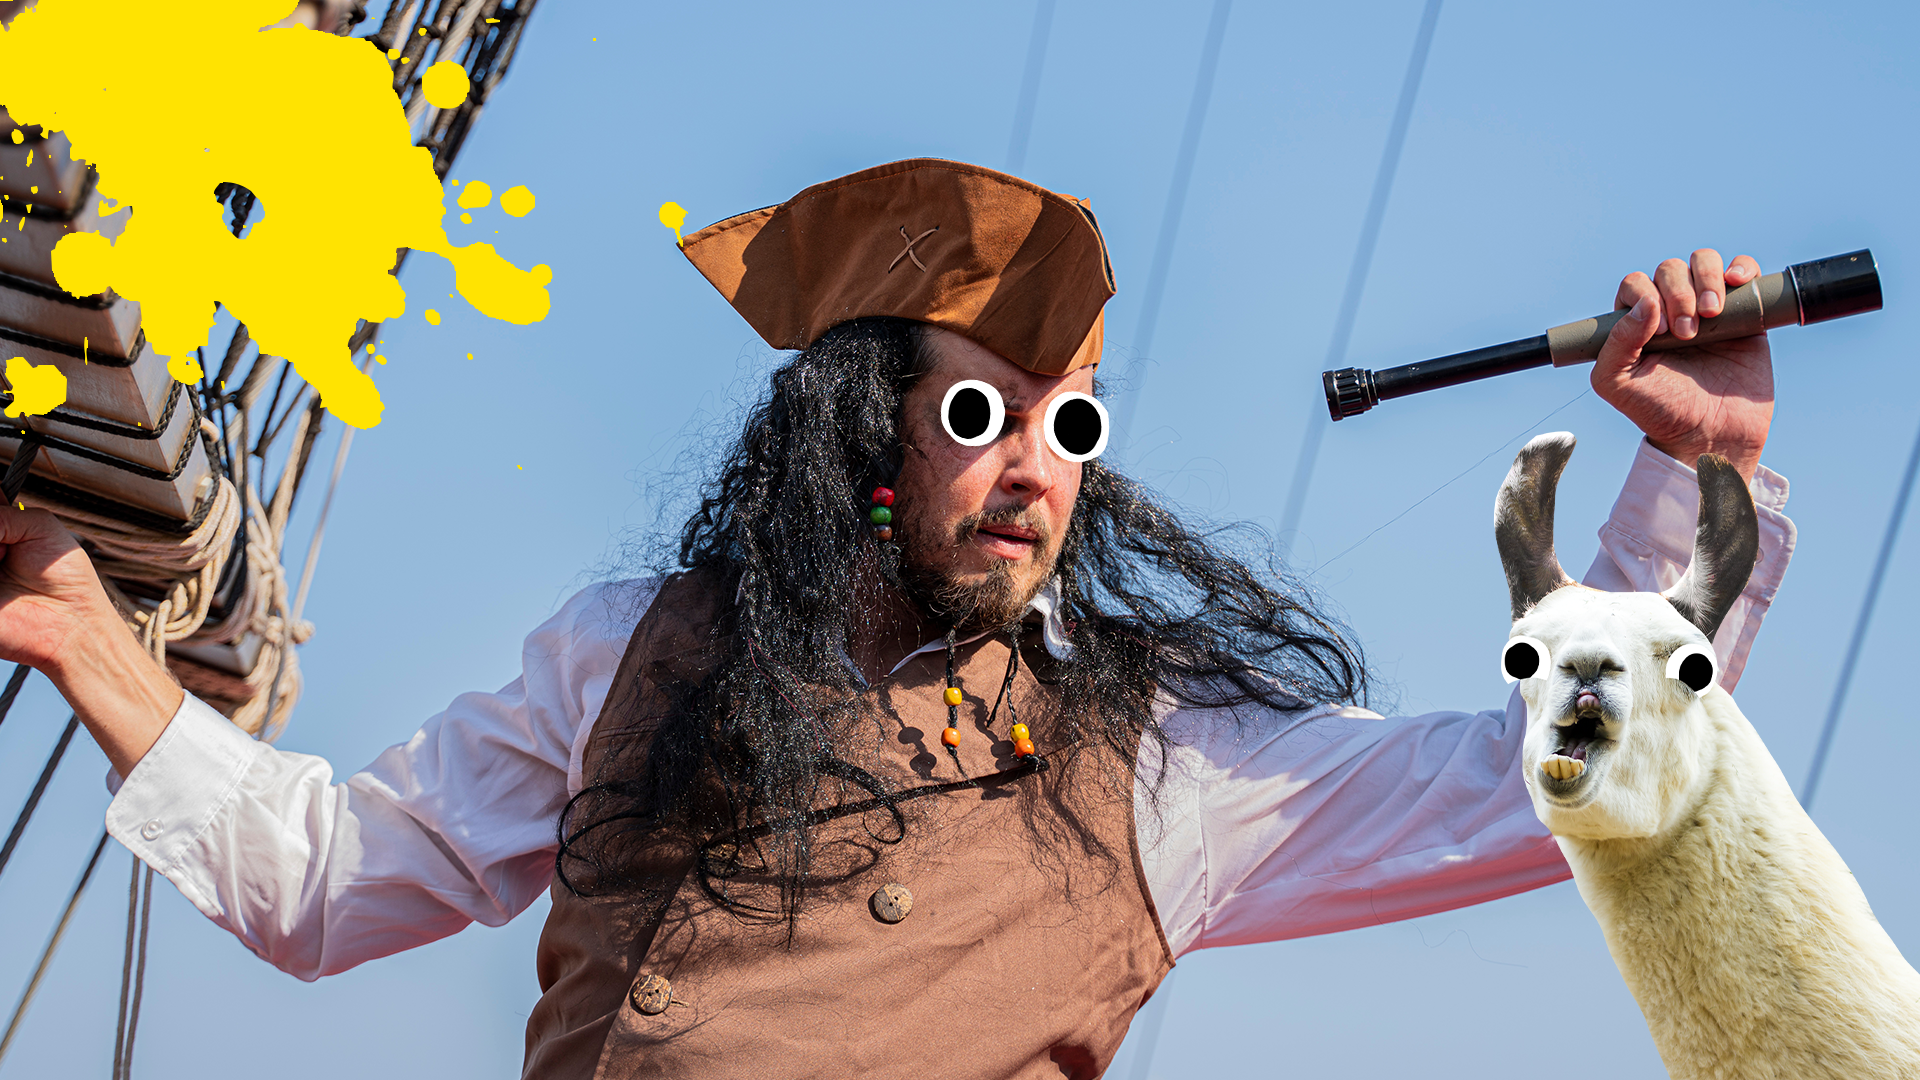 Pirate in rigging with splat and llama 